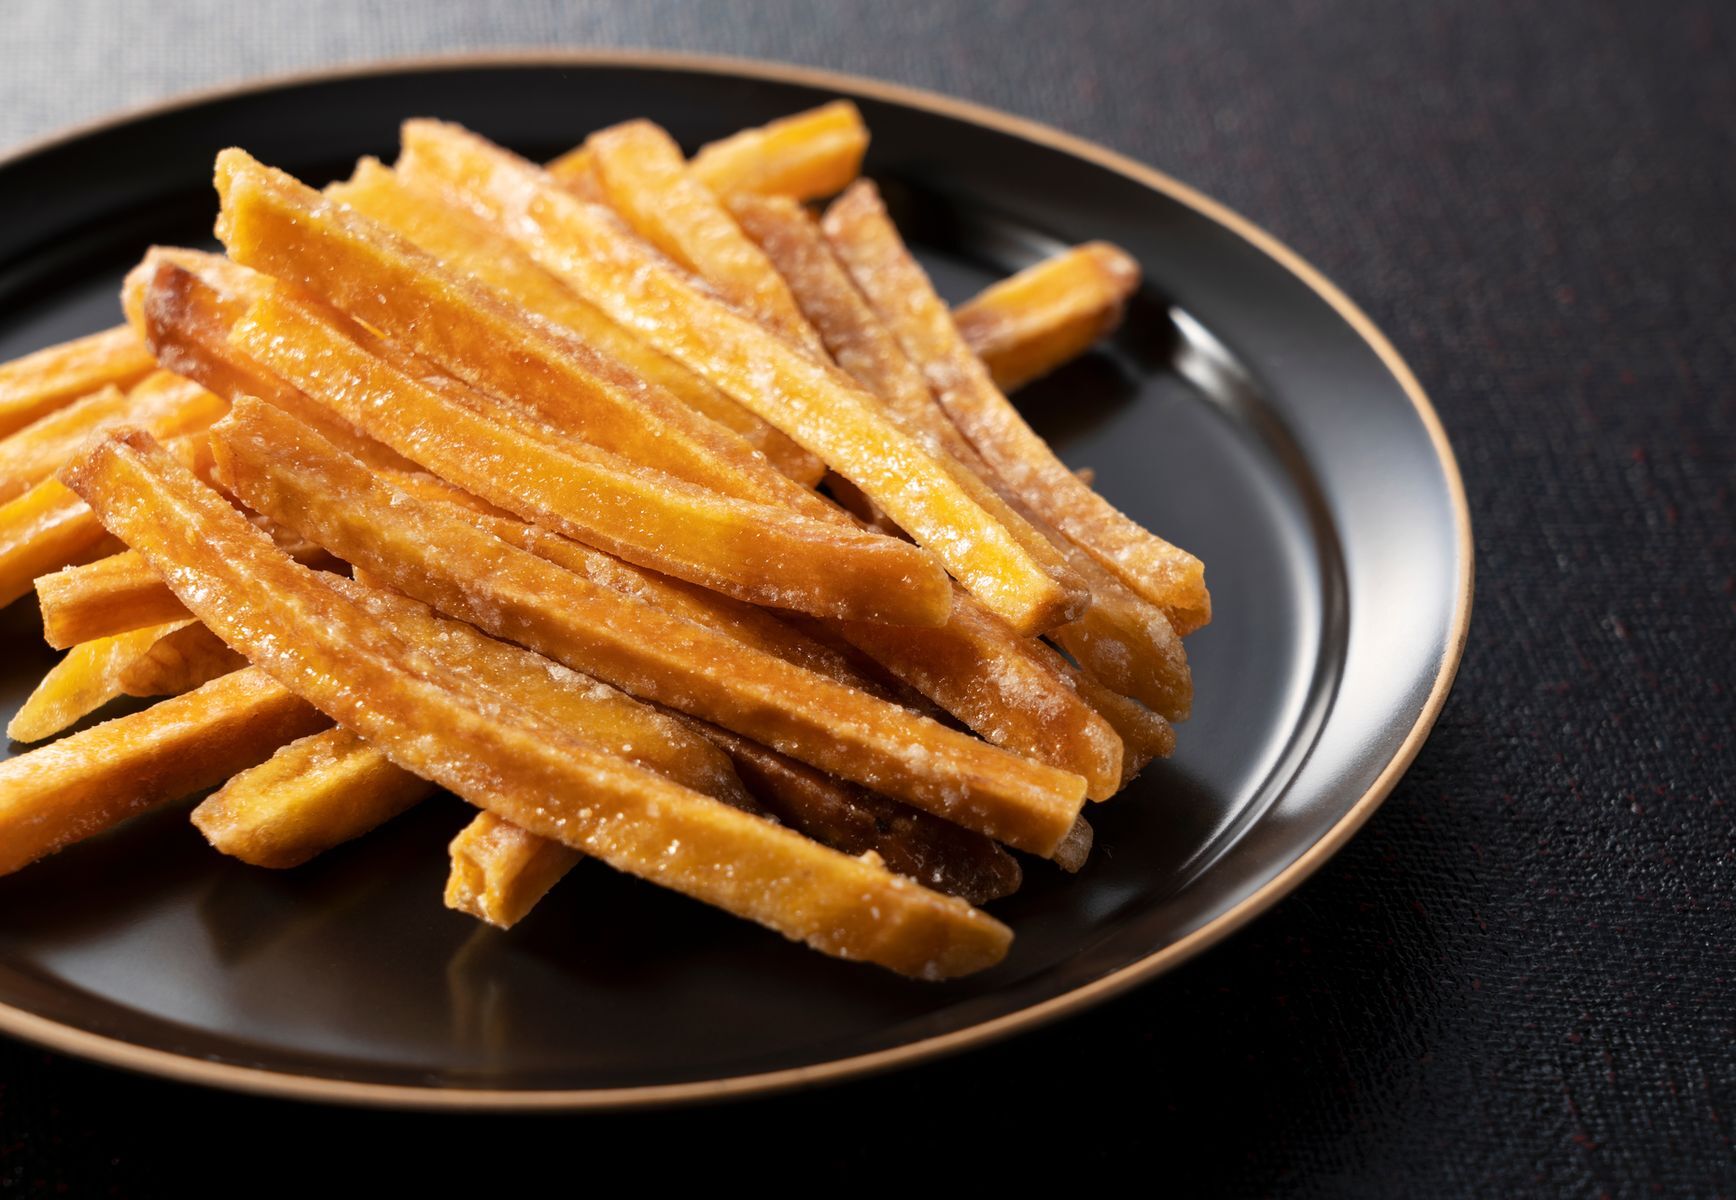 <p>For a churros-like treat, try sprinkling your fries with a cinnamon-sugar mixture, then dipping them one by one in vanilla cream. You’re in for a true delight, <a href="https://sallysbakingaddiction.com/cinnamon-sugar-sweet-potato-fries-with-vanilla-icing-dip/">especially when made with sweet potatoes</a>!</p>